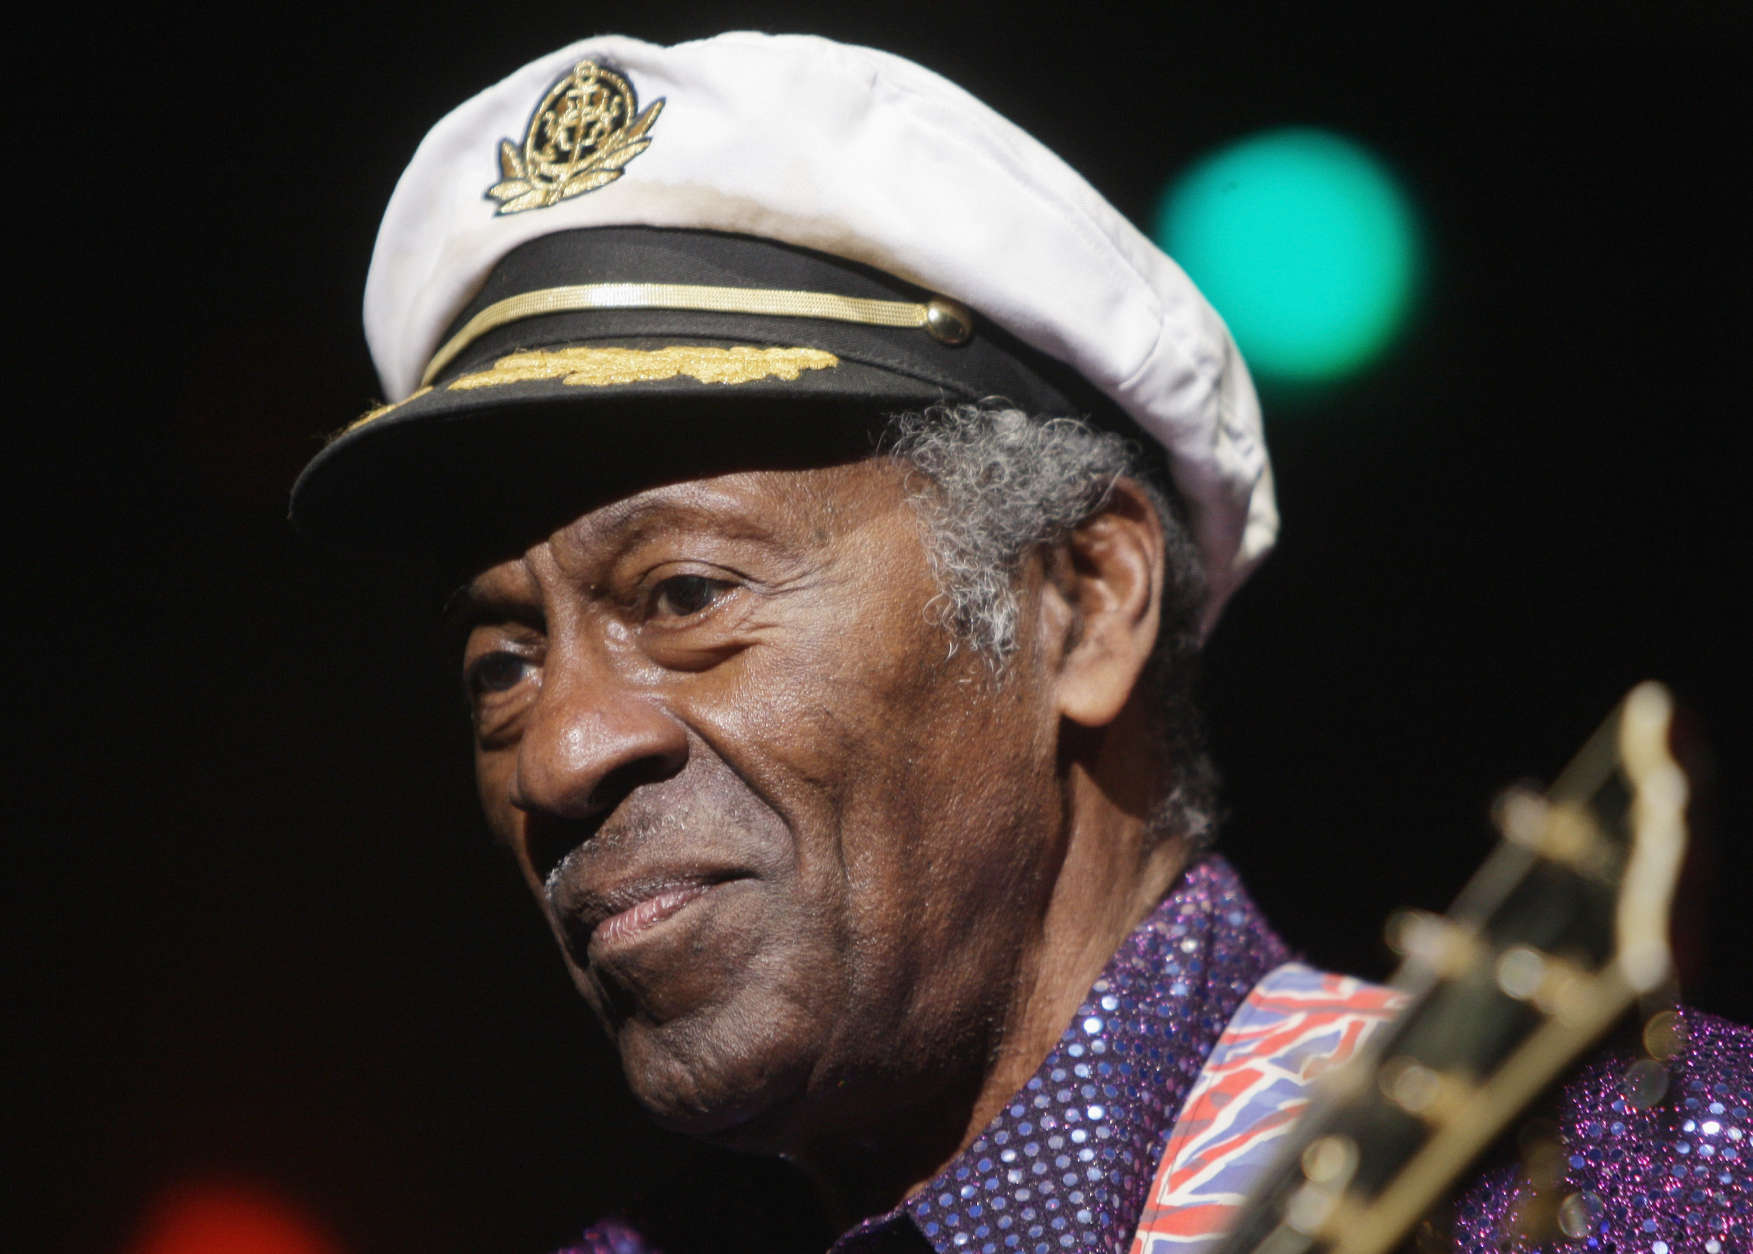 PARIS - NOVEMBER 14: Singer Chuck Berry performs at the 'Les Legendes Du Rock and Roll' concert at the Zenith on November 14, 2008 in Paris, France. (Photo by Francois Durand/Getty Images)